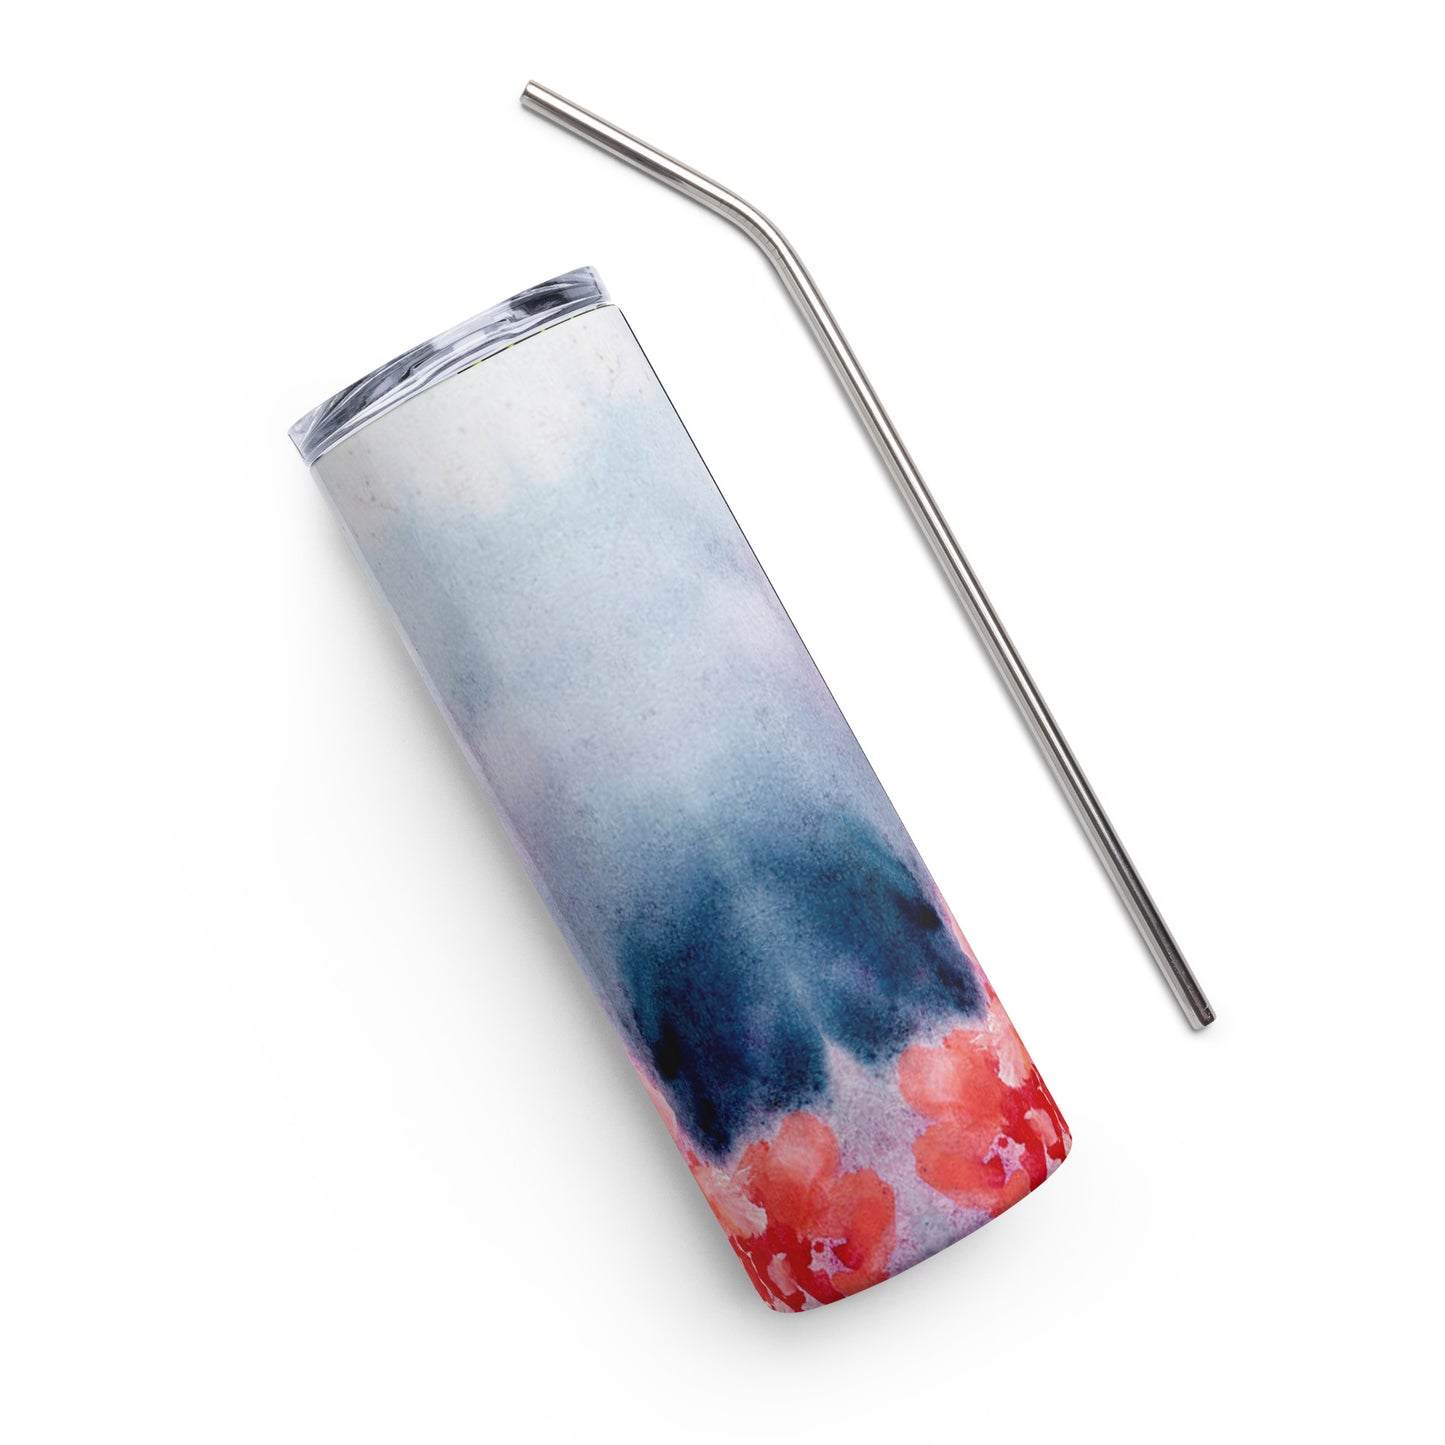 Mireille Fine Art, abstract floral stainless steel tumbler with metal straw, 20 oz